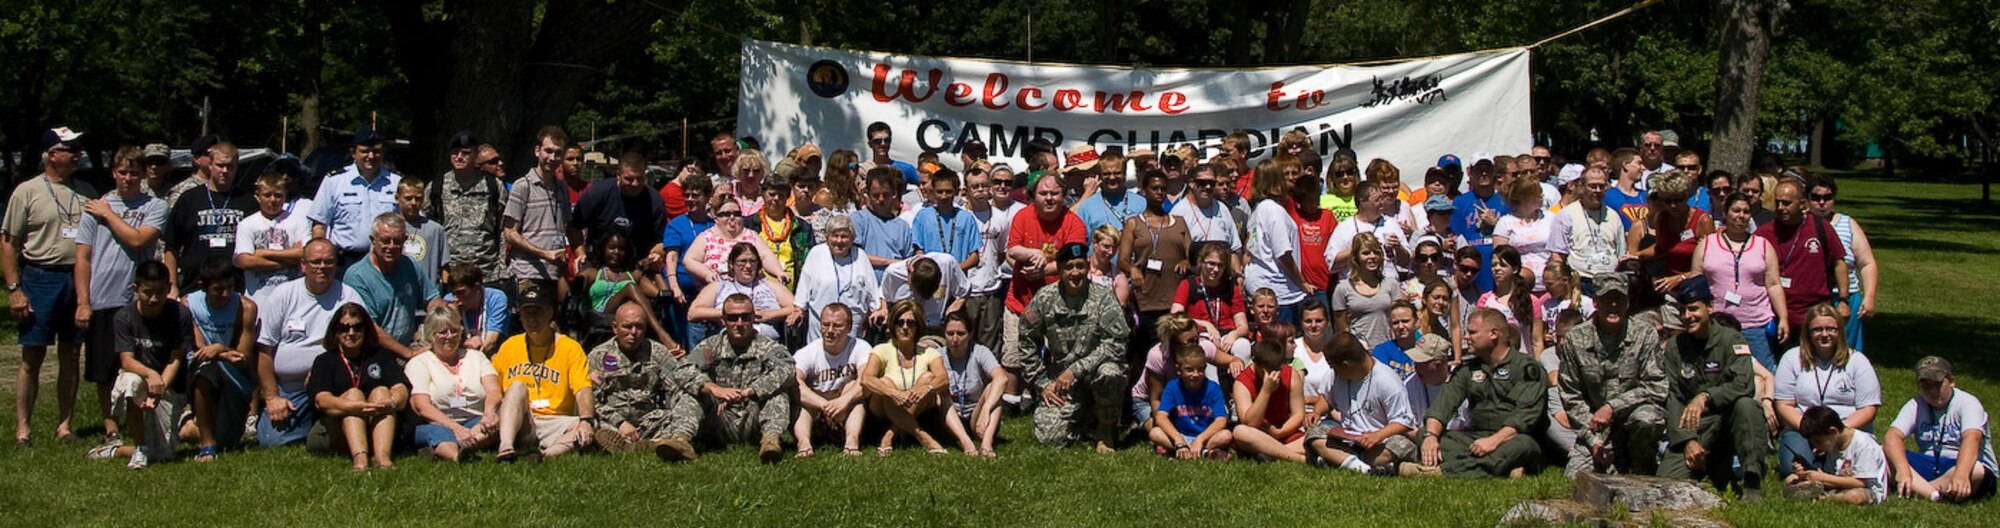 Campers, volunteers and National Guard members pose in front of a large Camp Guardian banner for a group photo during Mo. Adjutant General Stephen Danner's visit to the camp during the 2009 session.